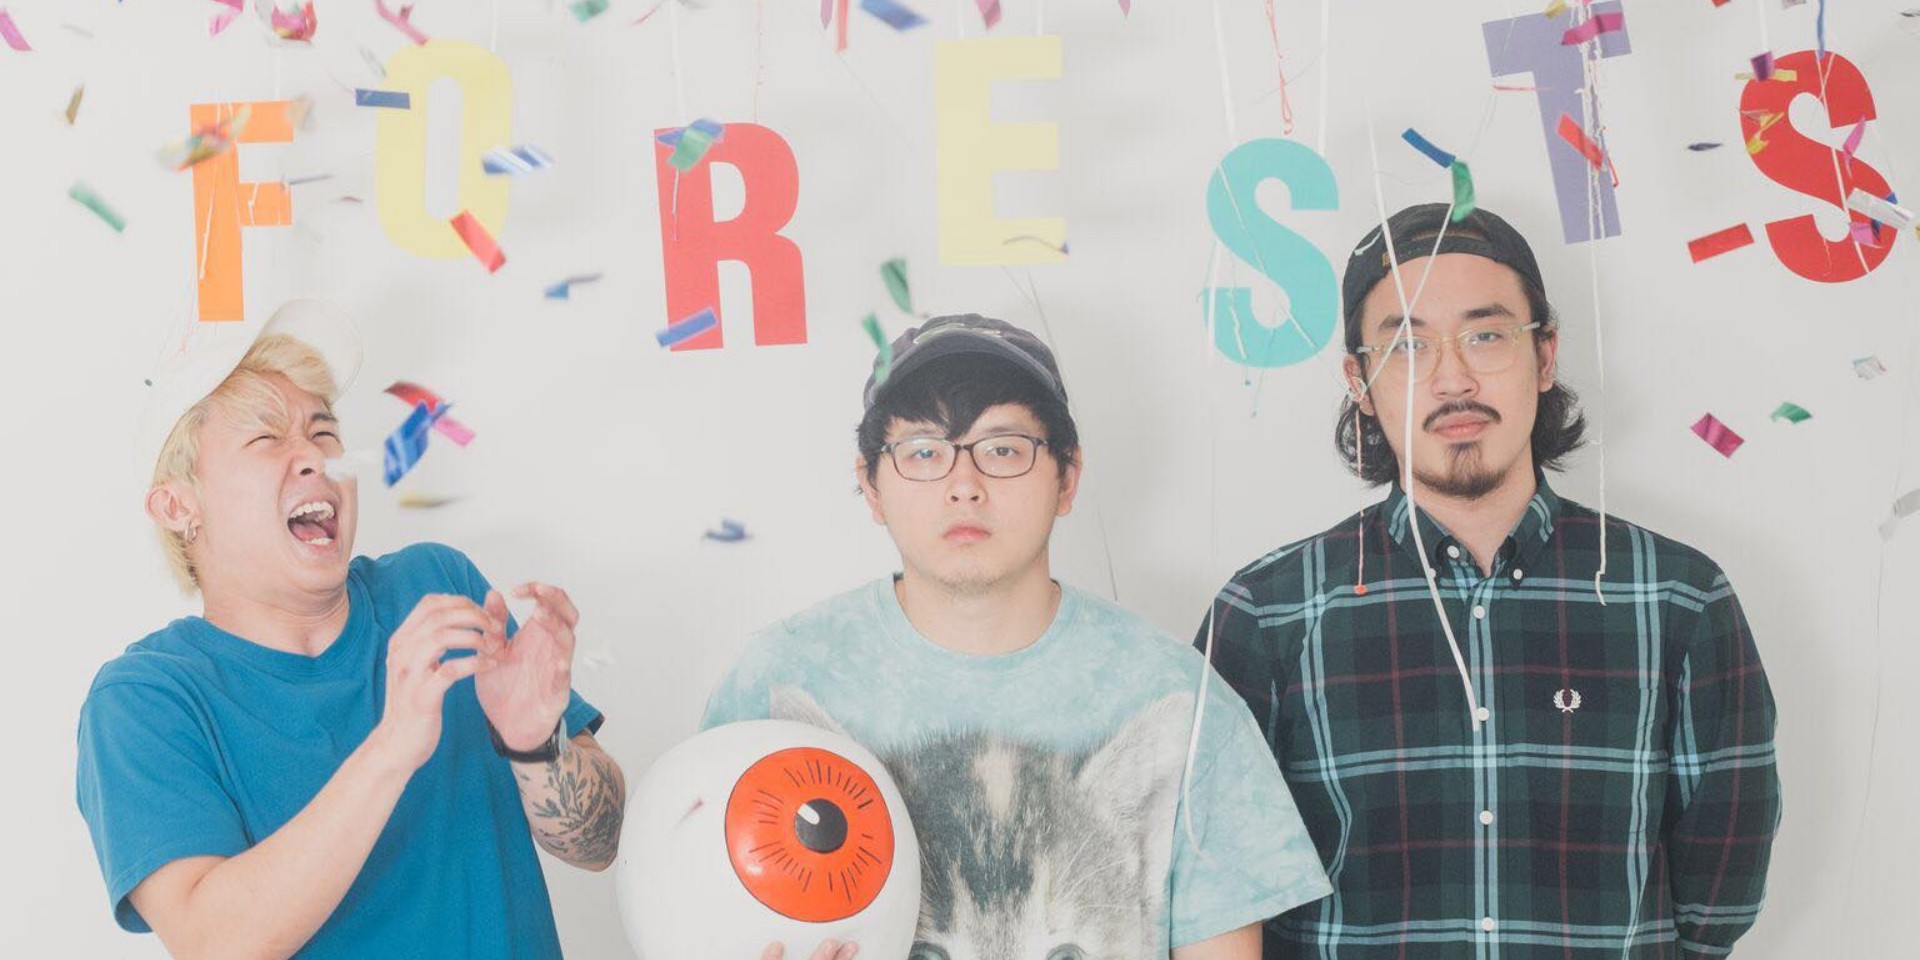 "Generally, we are three very emotional men who cry sometimes": An interview with Forests